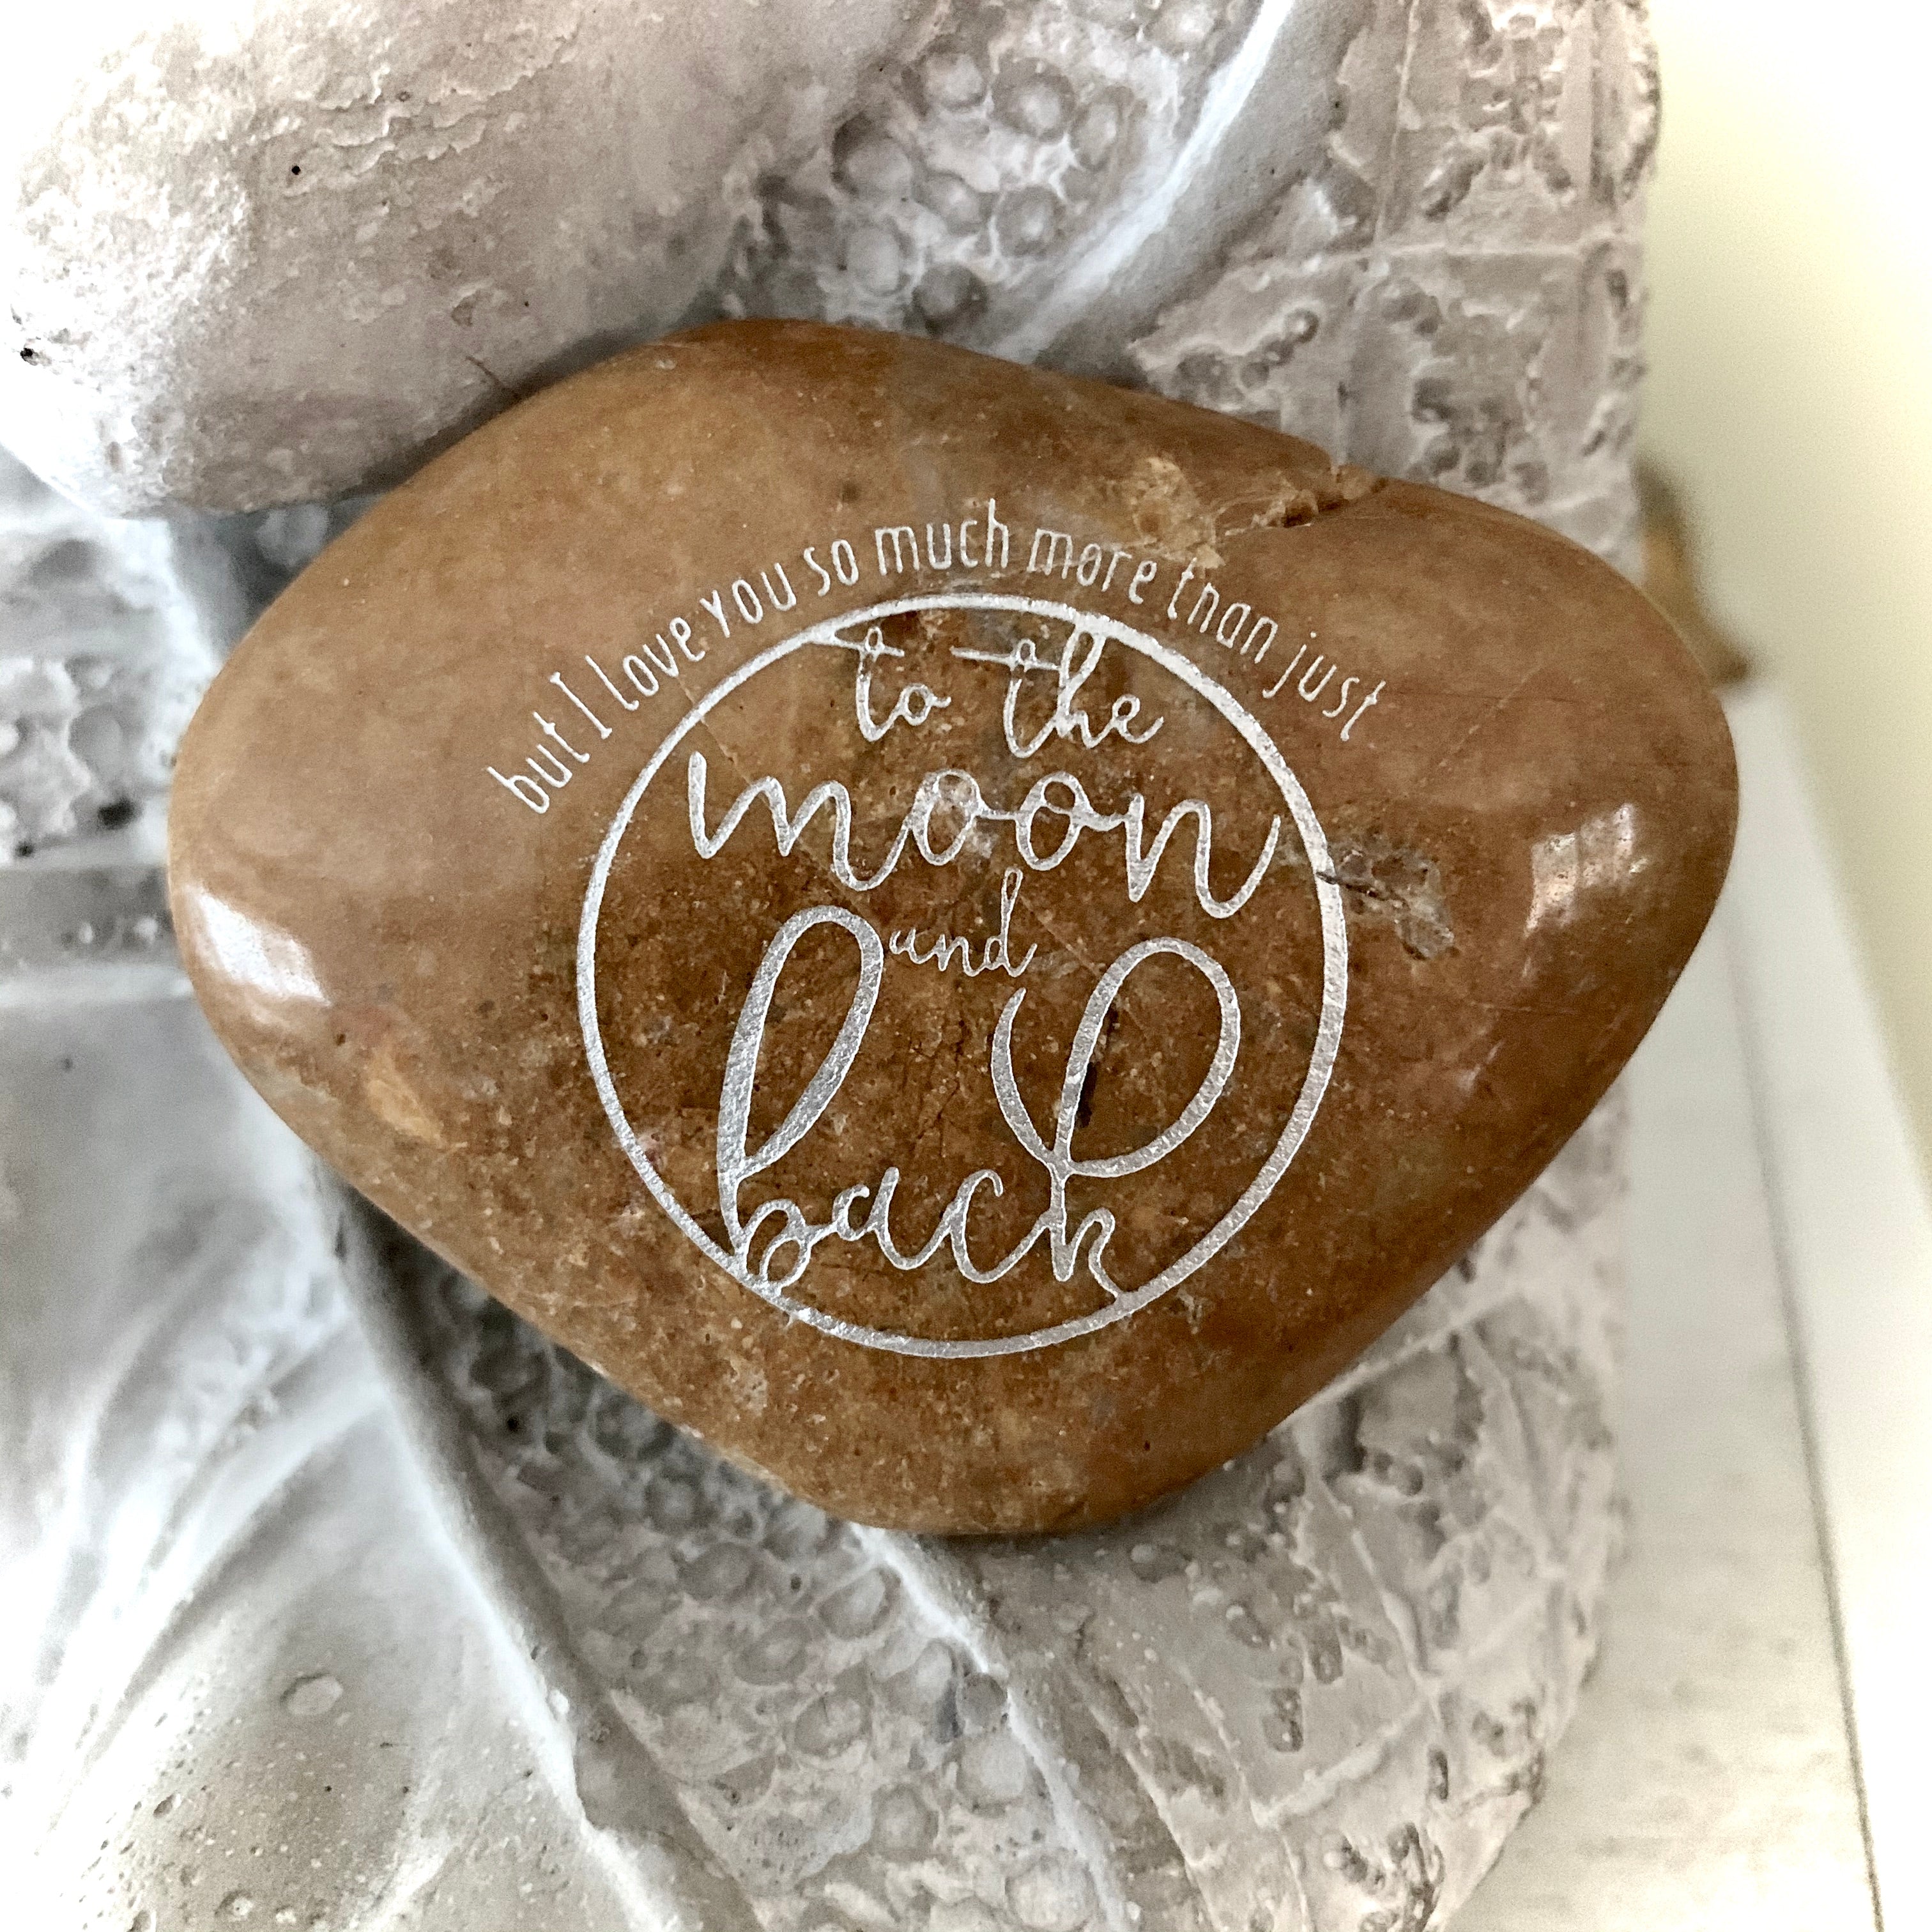 But I Love You So Much More Than Just To The Moon And Back ~ Engraved Inspirational Rock